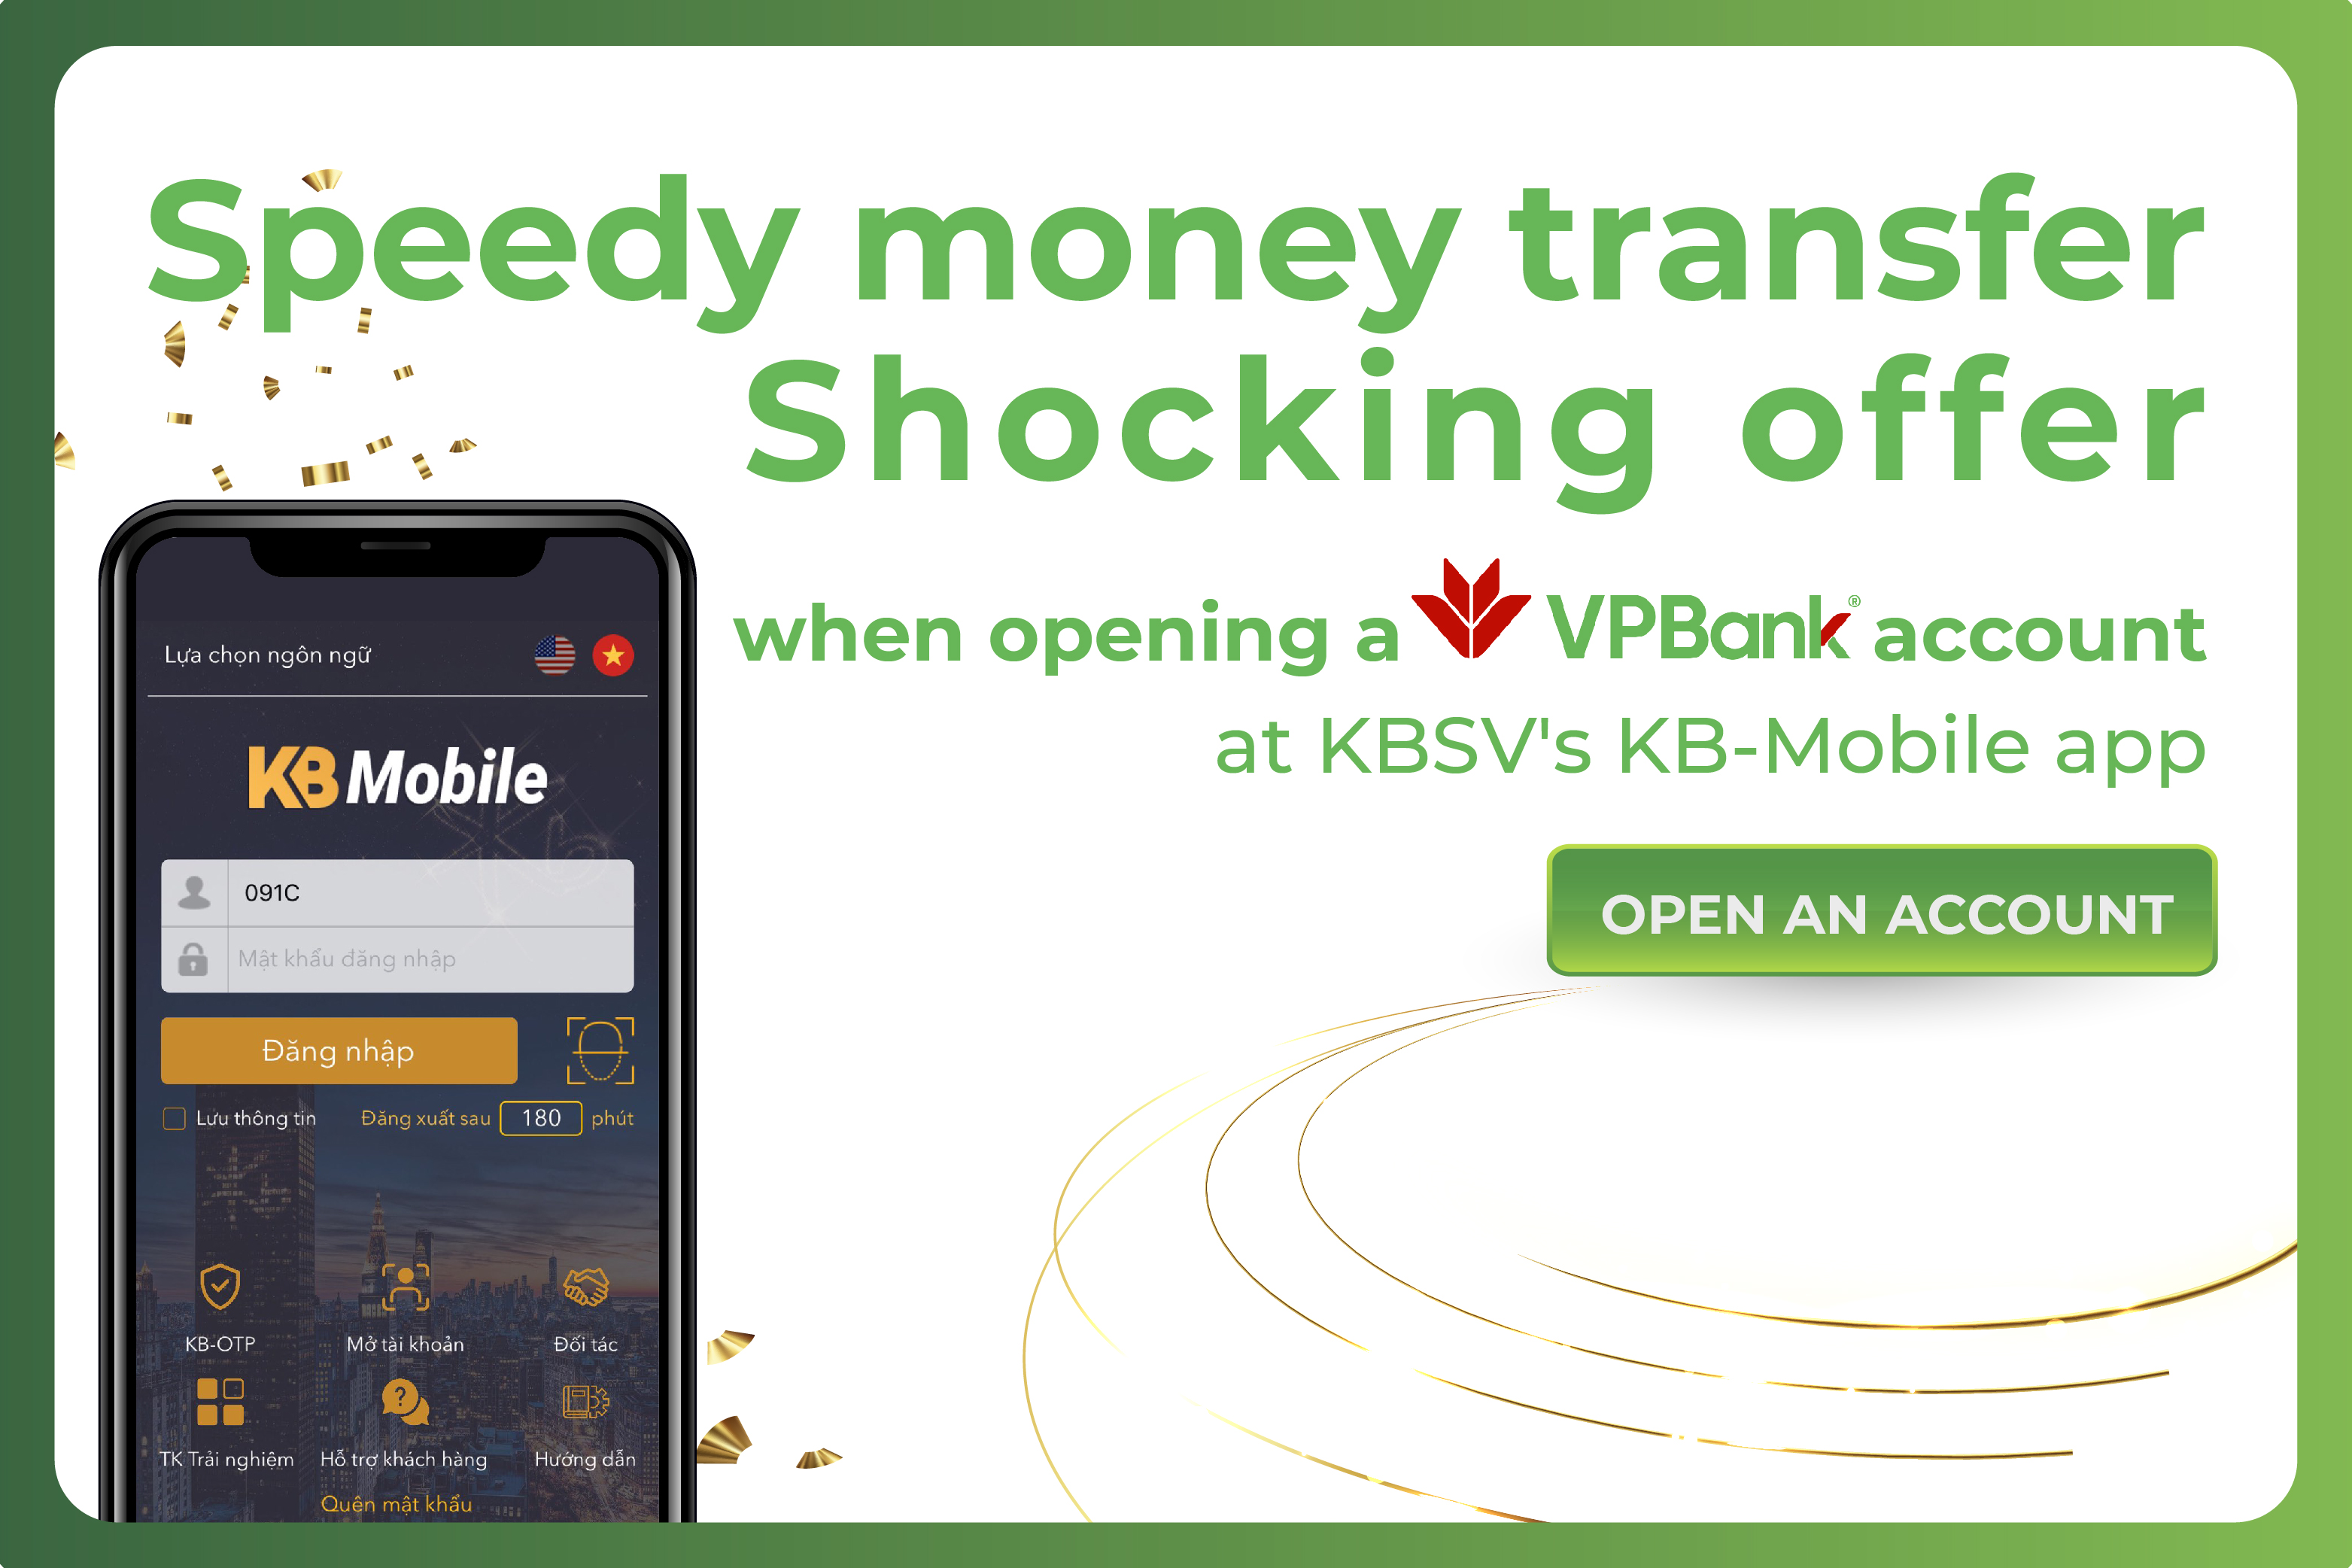 VND 100,000 give-away for KBSV’s customers who open VPBank bank accounts